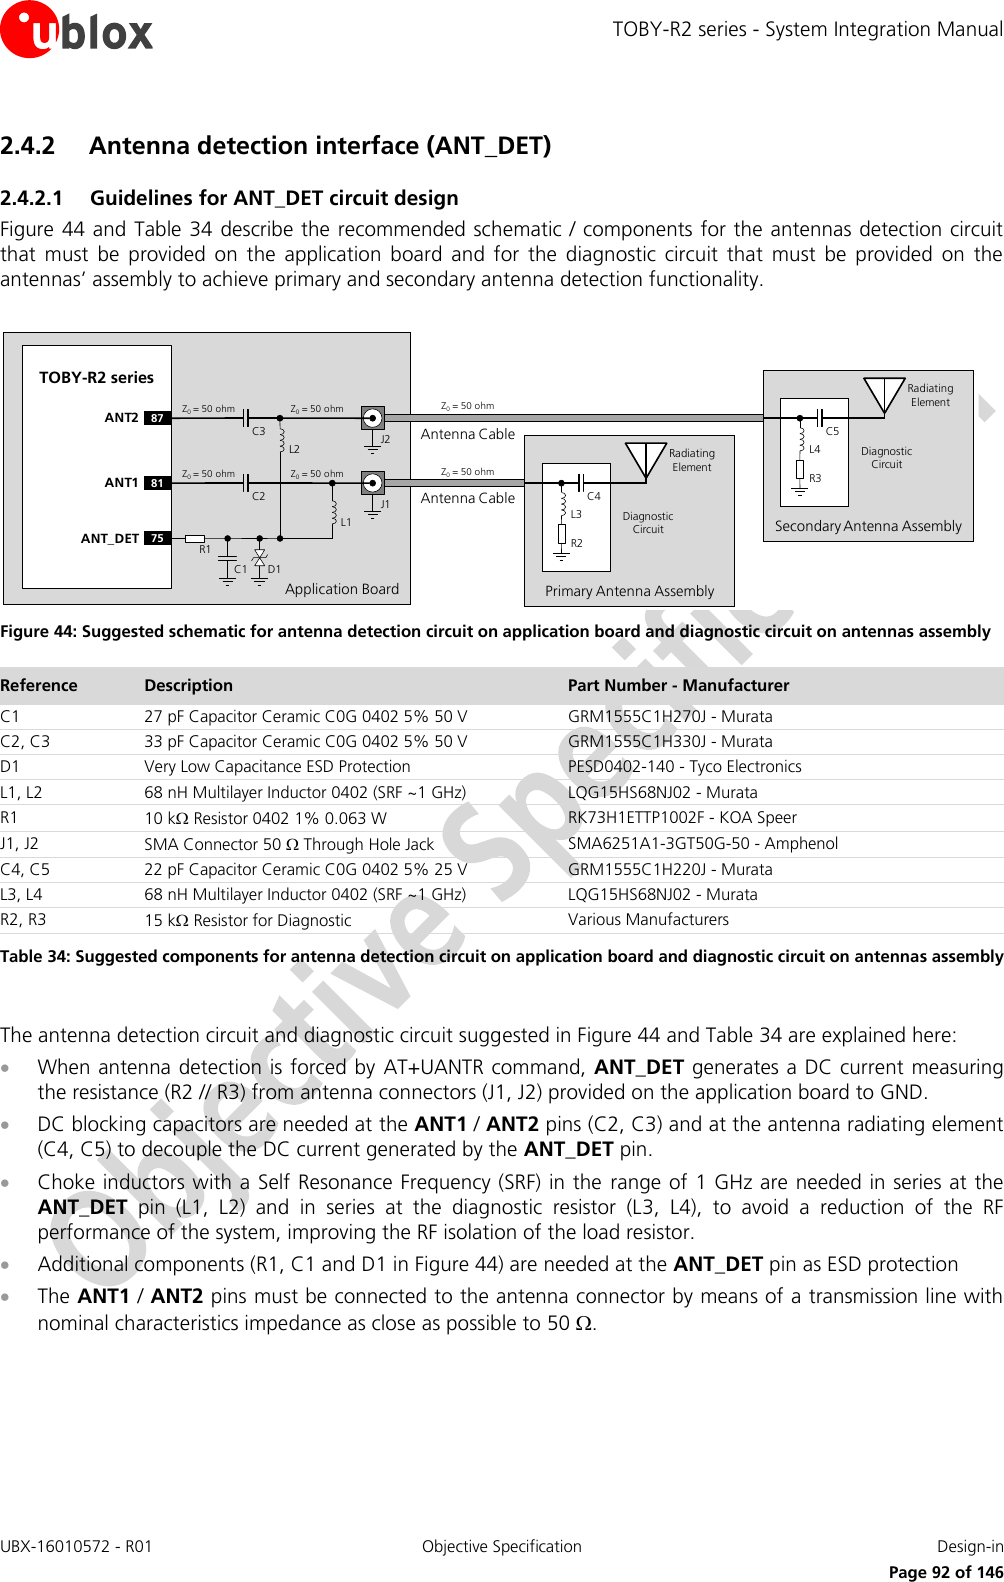 TOBY-R2 series - System Integration Manual UBX-16010572 - R01  Objective Specification  Design-in     Page 92 of 146 2.4.2 Antenna detection interface (ANT_DET) 2.4.2.1 Guidelines for ANT_DET circuit design Figure 44 and Table 34 describe the recommended schematic / components for the antennas detection circuit that  must  be  provided  on  the  application  board  and  for  the  diagnostic  circuit  that  must  be  provided  on  the antennas’ assembly to achieve primary and secondary antenna detection functionality.  Application BoardAntenna CableTOBY-R2 series81ANT175ANT_DET R1C1 D1C2 J1Z0= 50 ohm Z0= 50 ohm Z0= 50 ohmPrimary Antenna AssemblyR2C4L3Radiating ElementDiagnostic CircuitL2L1Antenna Cable87ANT2C3 J2Z0= 50 ohm Z0= 50 ohm Z0= 50 ohmSecondary Antenna AssemblyR3C5L4Radiating ElementDiagnostic Circuit Figure 44: Suggested schematic for antenna detection circuit on application board and diagnostic circuit on antennas assembly Reference Description Part Number - Manufacturer C1 27 pF Capacitor Ceramic C0G 0402 5% 50 V GRM1555C1H270J - Murata C2, C3 33 pF Capacitor Ceramic C0G 0402 5% 50 V GRM1555C1H330J - Murata D1 Very Low Capacitance ESD Protection PESD0402-140 - Tyco Electronics L1, L2 68 nH Multilayer Inductor 0402 (SRF ~1 GHz) LQG15HS68NJ02 - Murata R1 10 k Resistor 0402 1% 0.063 W RK73H1ETTP1002F - KOA Speer J1, J2 SMA Connector 50  Through Hole Jack SMA6251A1-3GT50G-50 - Amphenol C4, C5 22 pF Capacitor Ceramic C0G 0402 5% 25 V  GRM1555C1H220J - Murata L3, L4 68 nH Multilayer Inductor 0402 (SRF ~1 GHz) LQG15HS68NJ02 - Murata R2, R3 15 k Resistor for Diagnostic Various Manufacturers Table 34: Suggested components for antenna detection circuit on application board and diagnostic circuit on antennas assembly  The antenna detection circuit and diagnostic circuit suggested in Figure 44 and Table 34 are explained here:  When antenna detection is forced by AT+UANTR command, ANT_DET generates a DC current measuring the resistance (R2 // R3) from antenna connectors (J1, J2) provided on the application board to GND.  DC blocking capacitors are needed at the ANT1 / ANT2 pins (C2, C3) and at the antenna radiating element (C4, C5) to decouple the DC current generated by the ANT_DET pin.  Choke inductors with a Self Resonance Frequency (SRF) in the range of 1 GHz are needed in series at the ANT_DET  pin  (L1,  L2)  and  in  series  at  the  diagnostic  resistor  (L3,  L4),  to  avoid  a  reduction  of  the  RF performance of the system, improving the RF isolation of the load resistor.   Additional components (R1, C1 and D1 in Figure 44) are needed at the ANT_DET pin as ESD protection  The ANT1 / ANT2 pins must be connected to the antenna connector by means of a transmission line with nominal characteristics impedance as close as possible to 50 .  